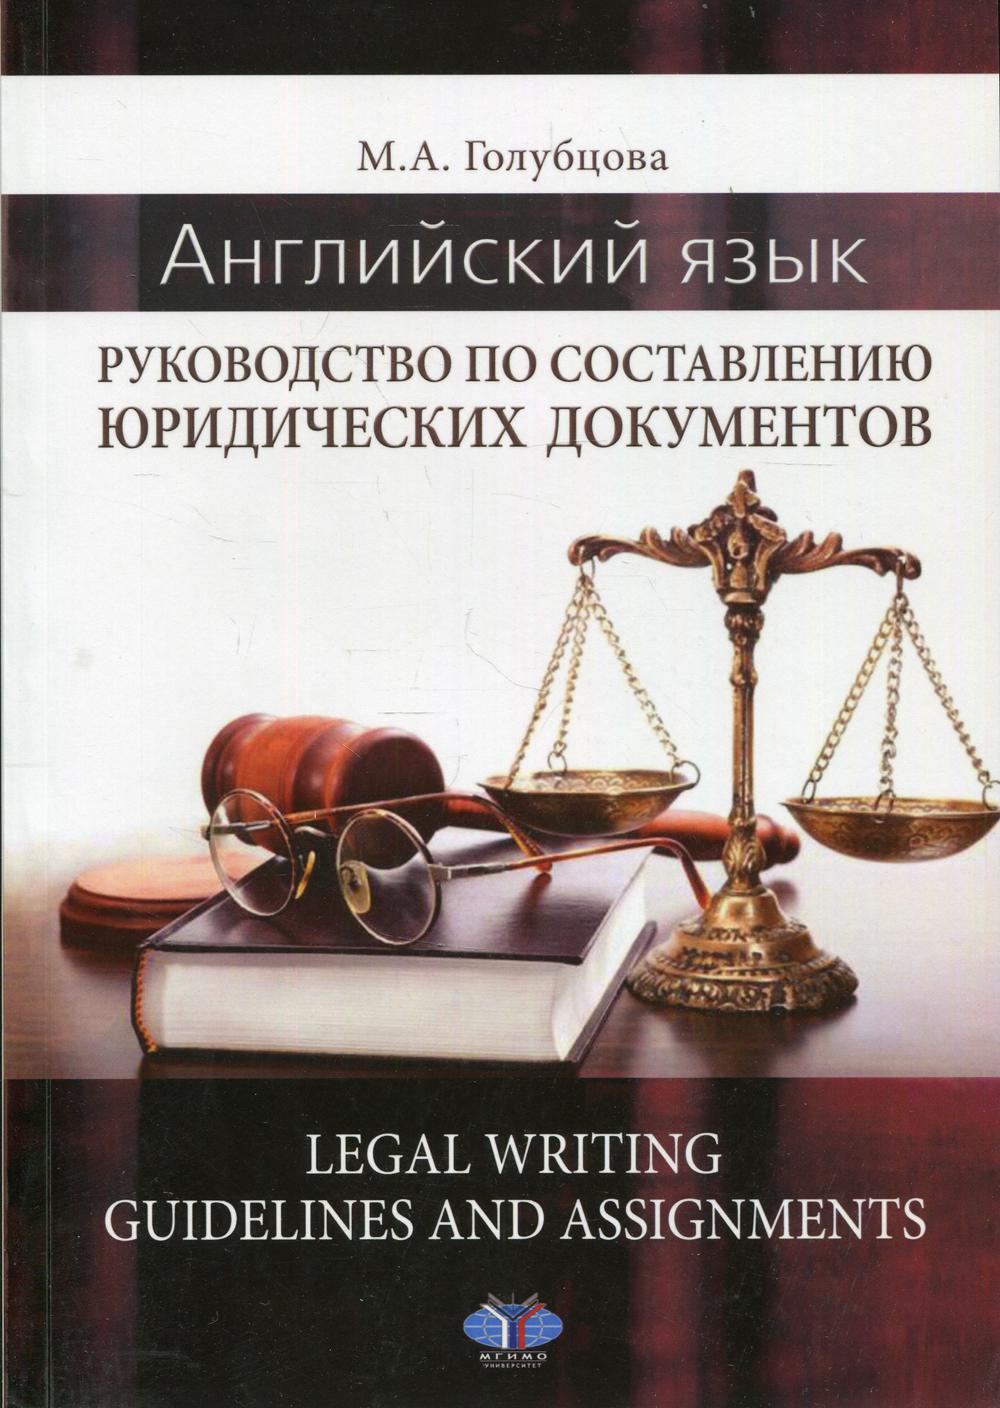  .     . Legal Writing guidelines and assignments:  